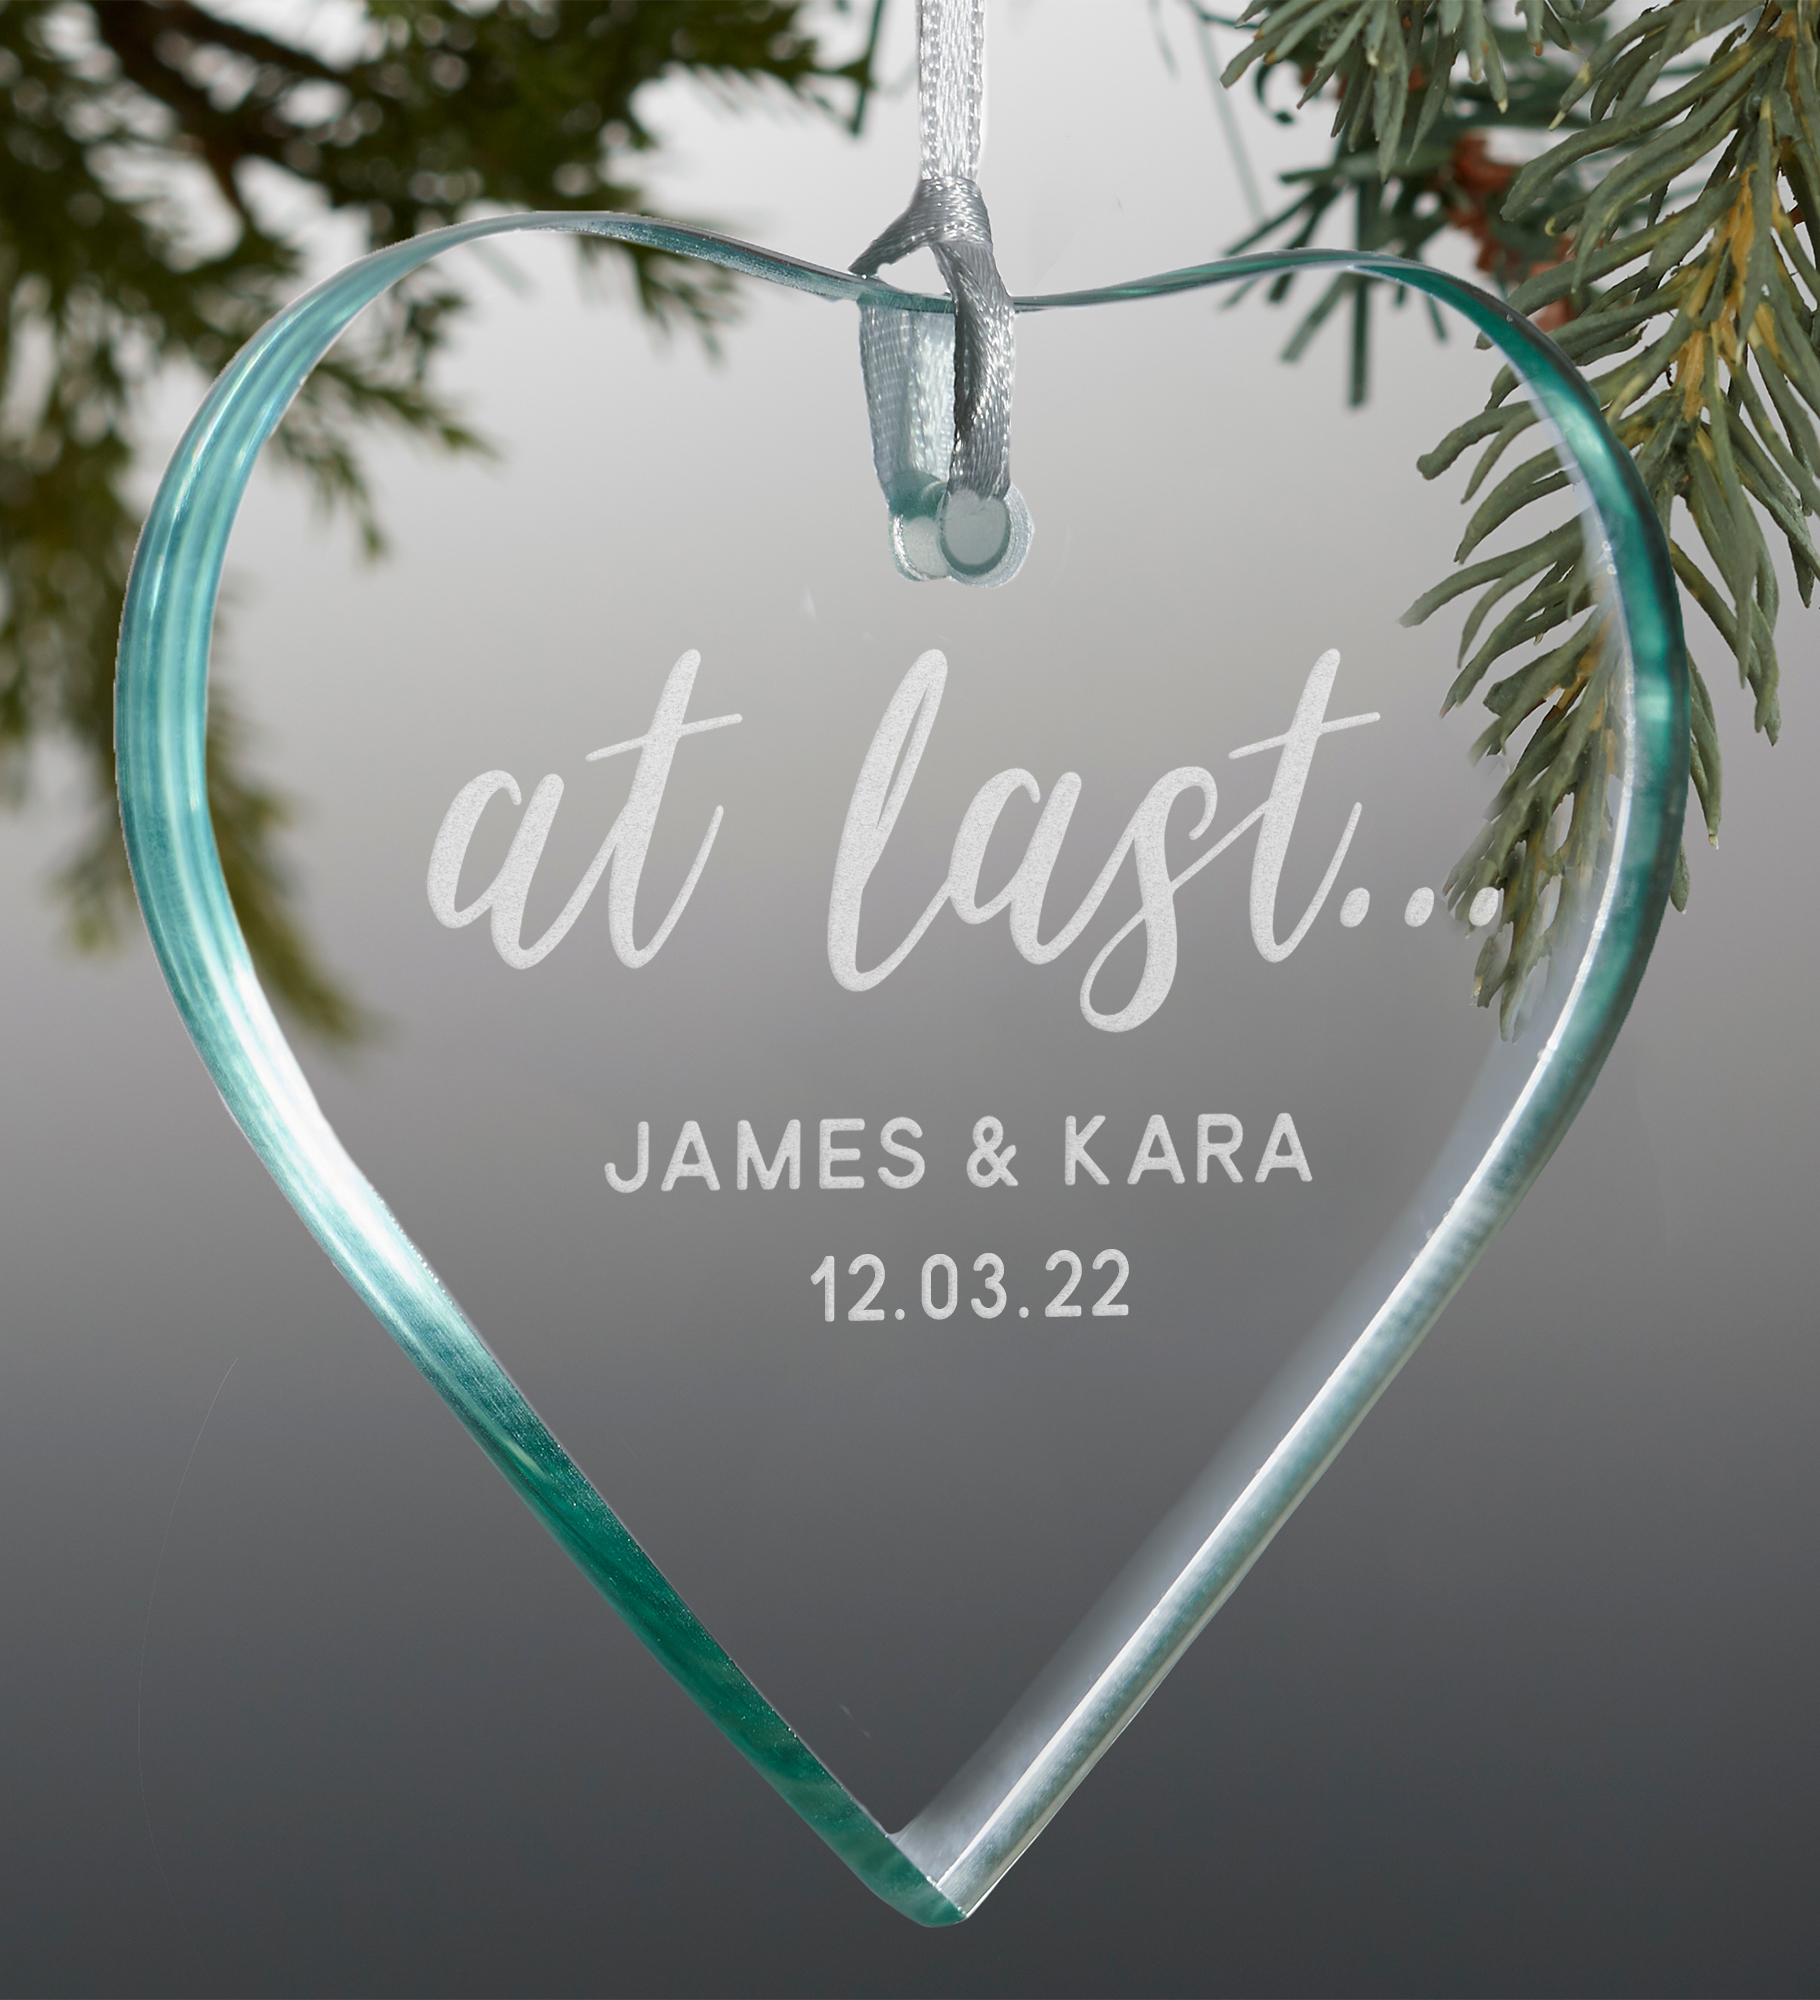 At Last... Personalized Wedding Heart Ornament